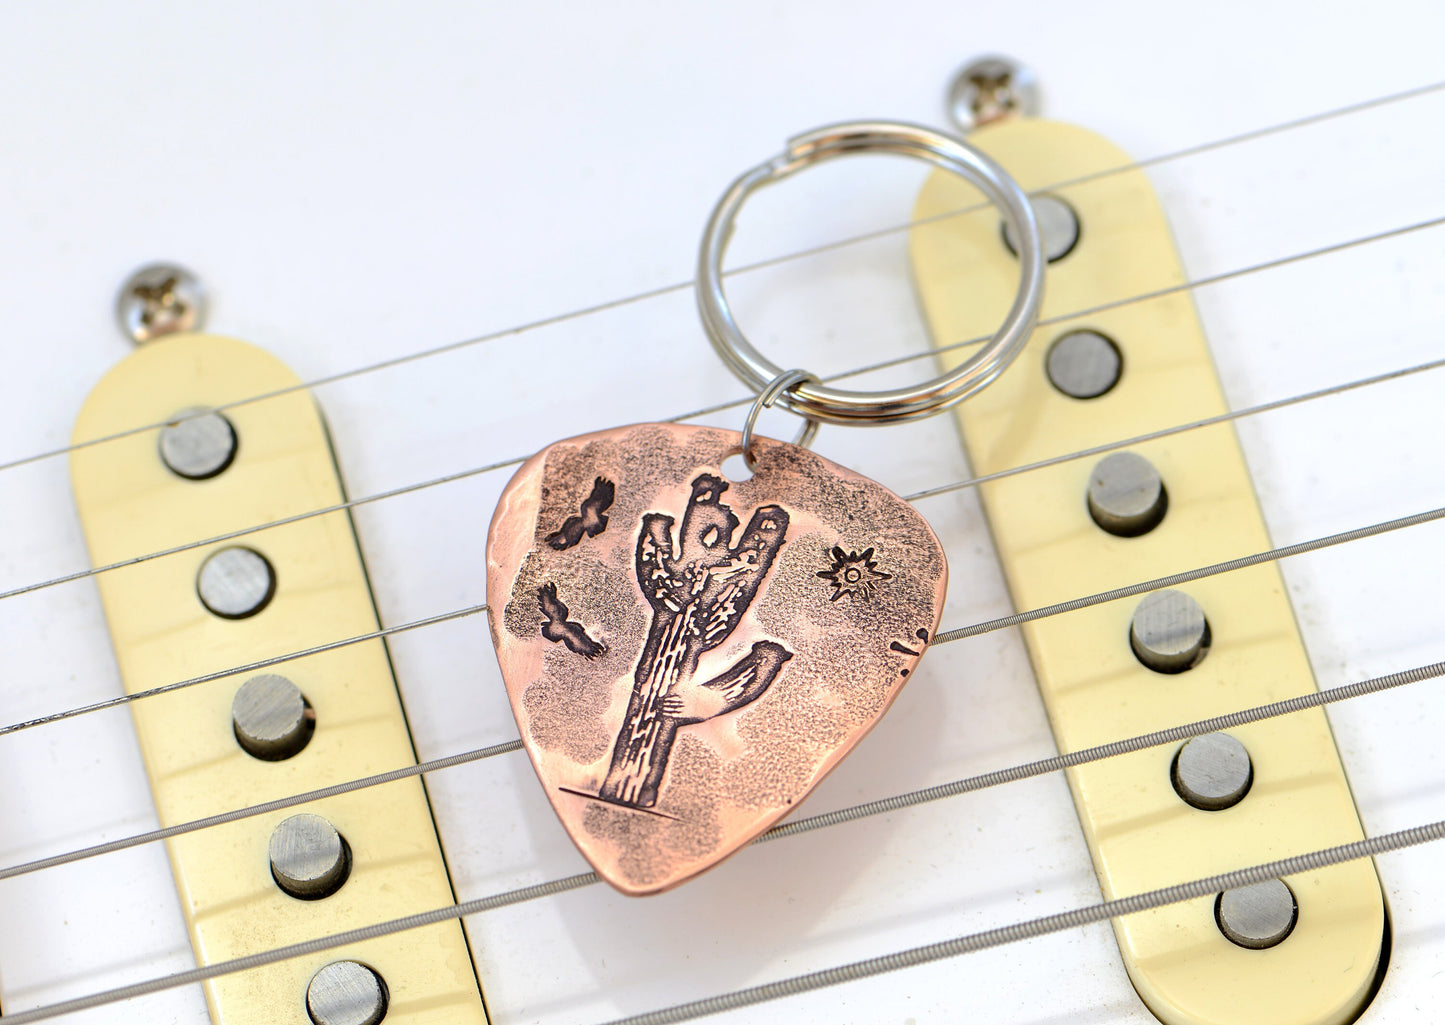 Cactus on Guitar Pick Keychain in Copper